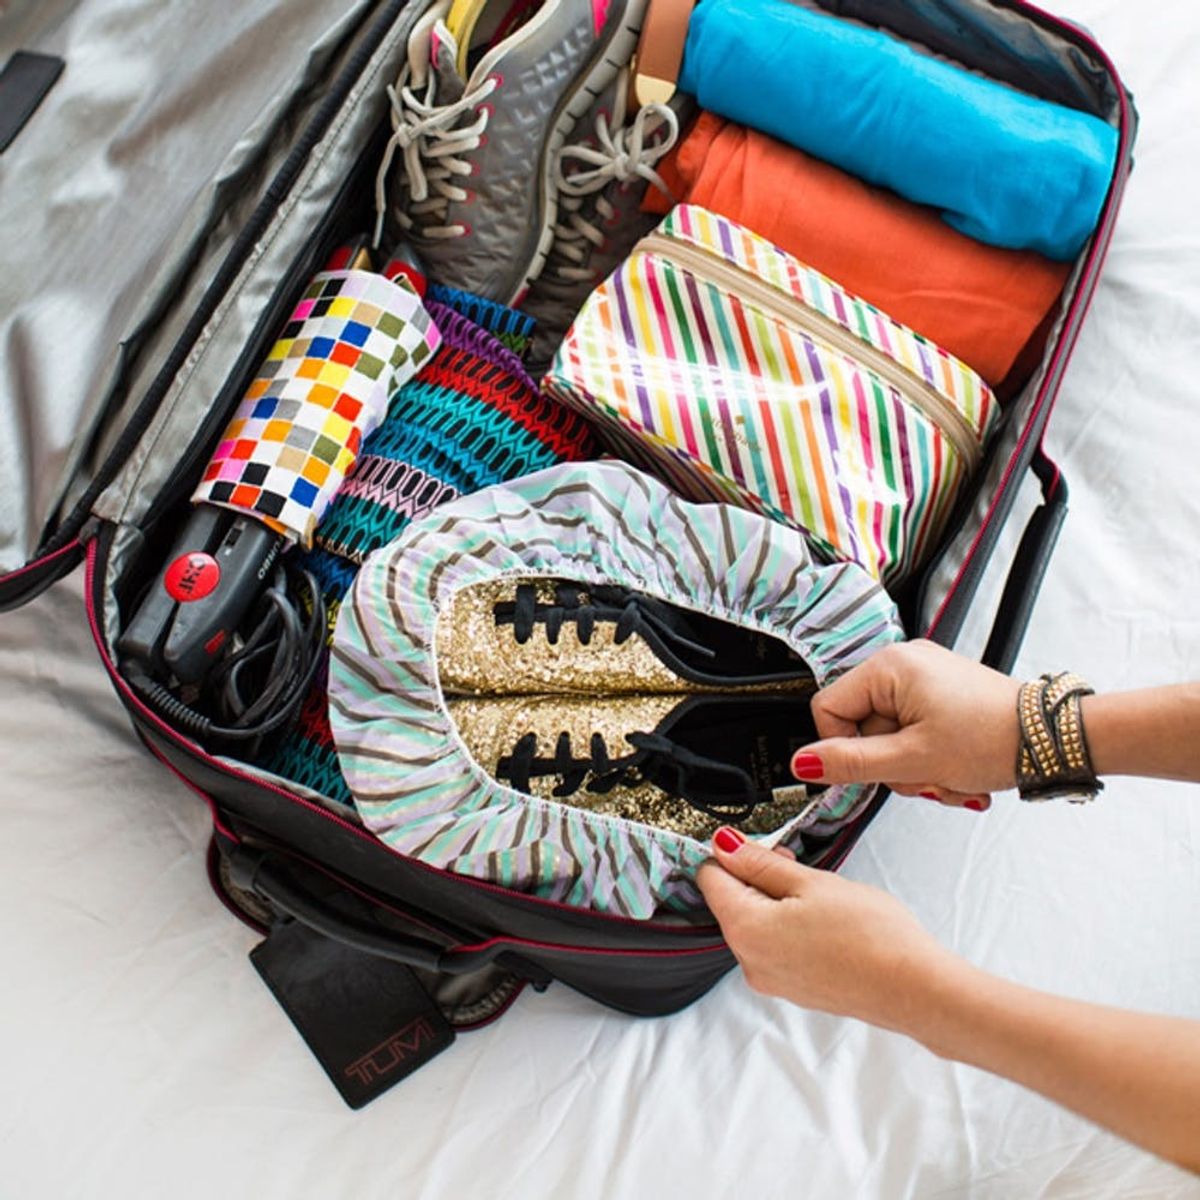 7 Essential Packing Tips for Traveling With Just a Carry-On